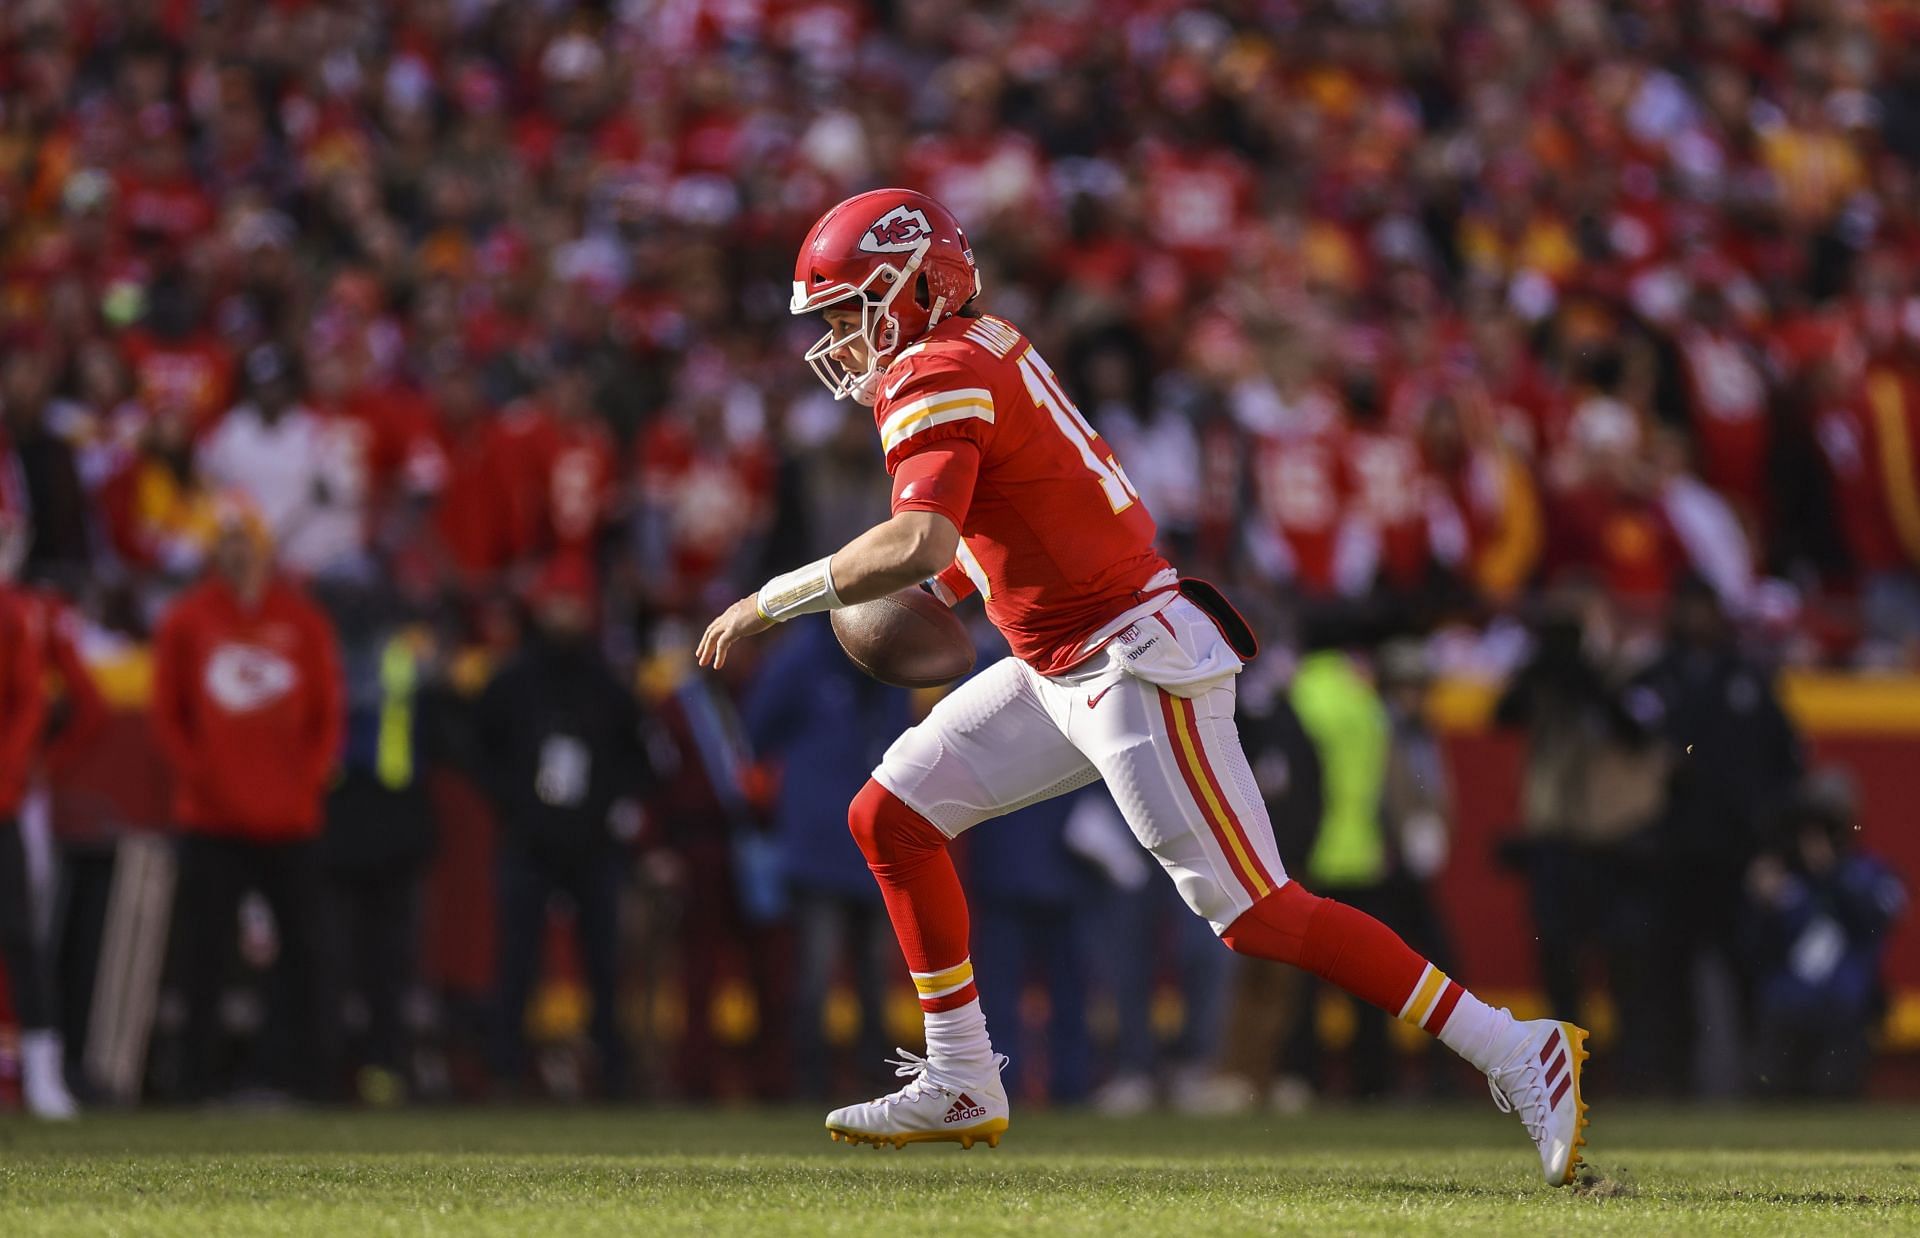 The Kansas City Chiefs may not have as easy a time in 2022 NFL as they have had in recent years